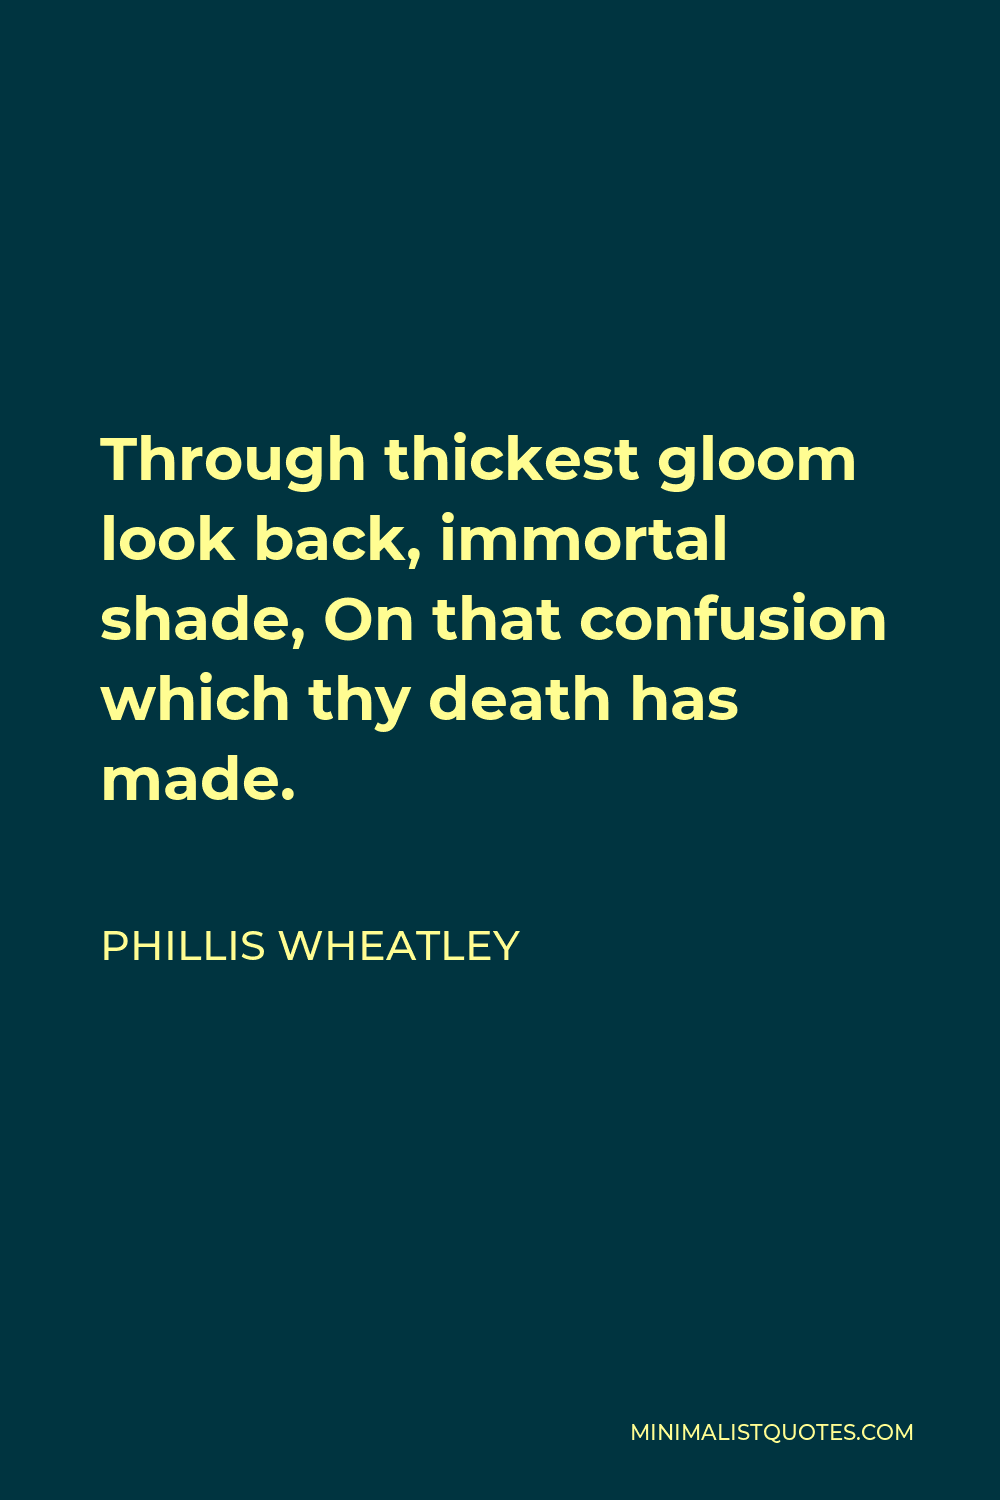 Phillis Wheatley Quote - Through thickest gloom look back, immortal shade, On that confusion which thy death has made.